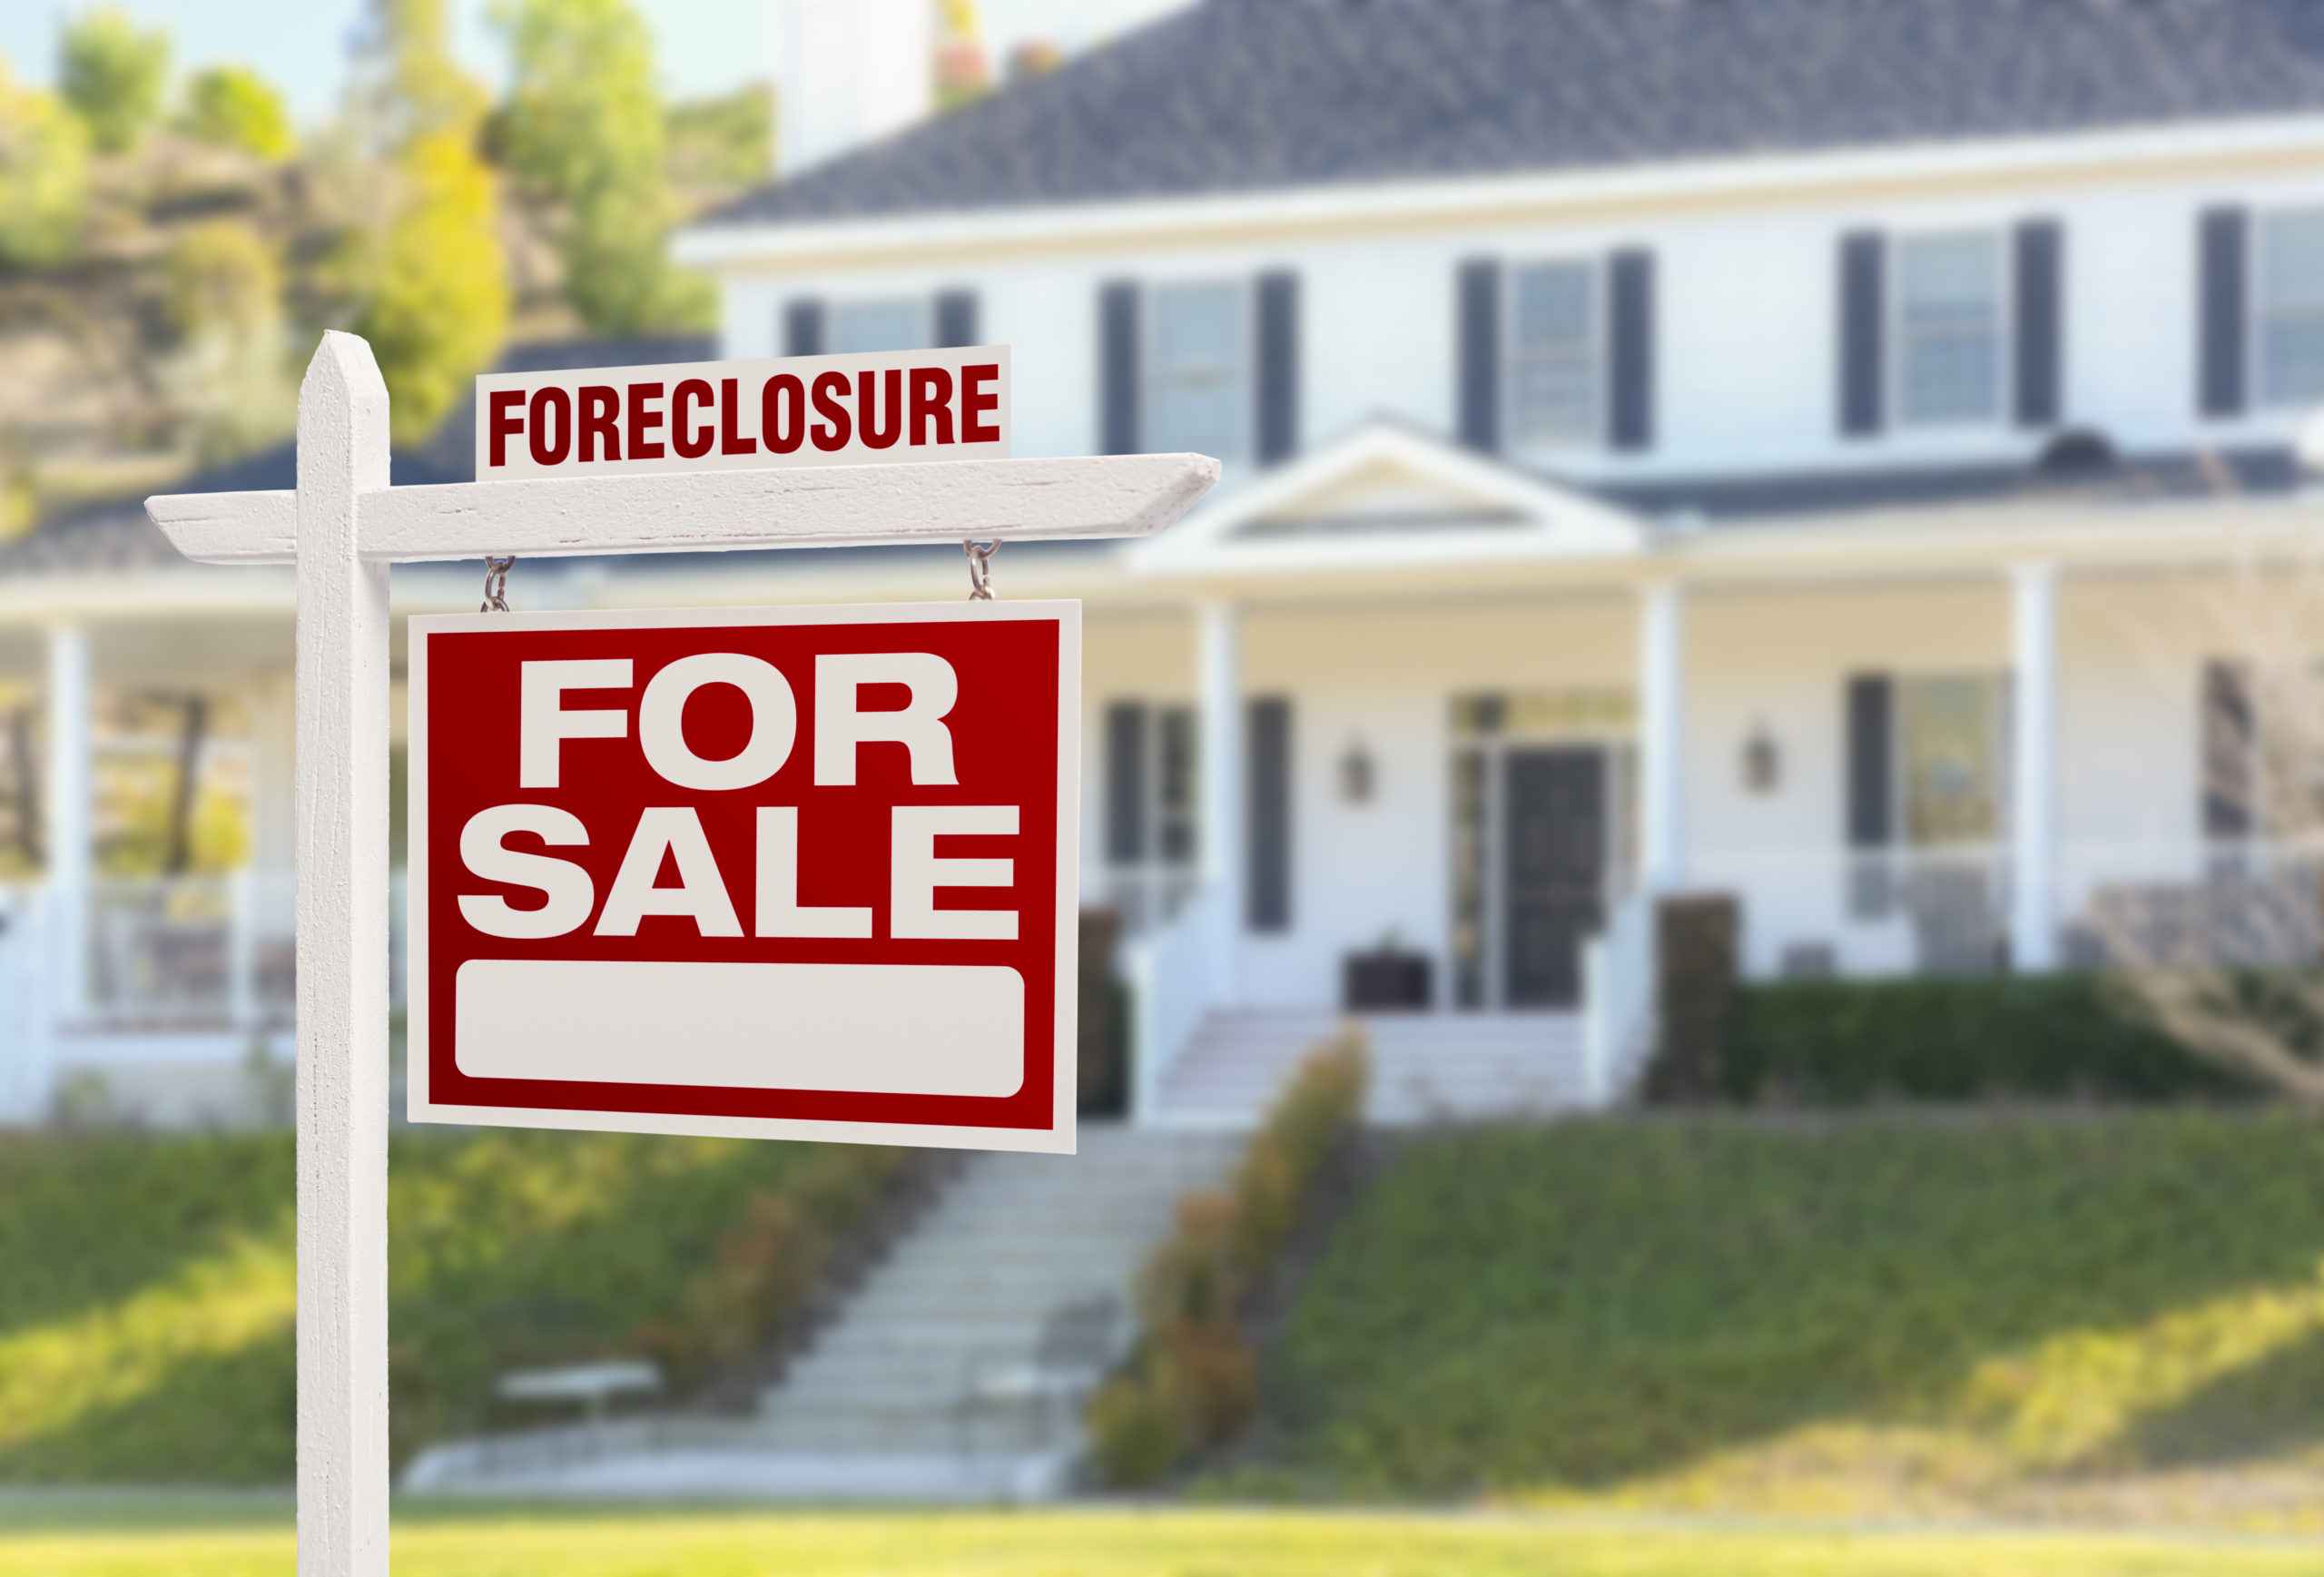 house with foreclosure sign